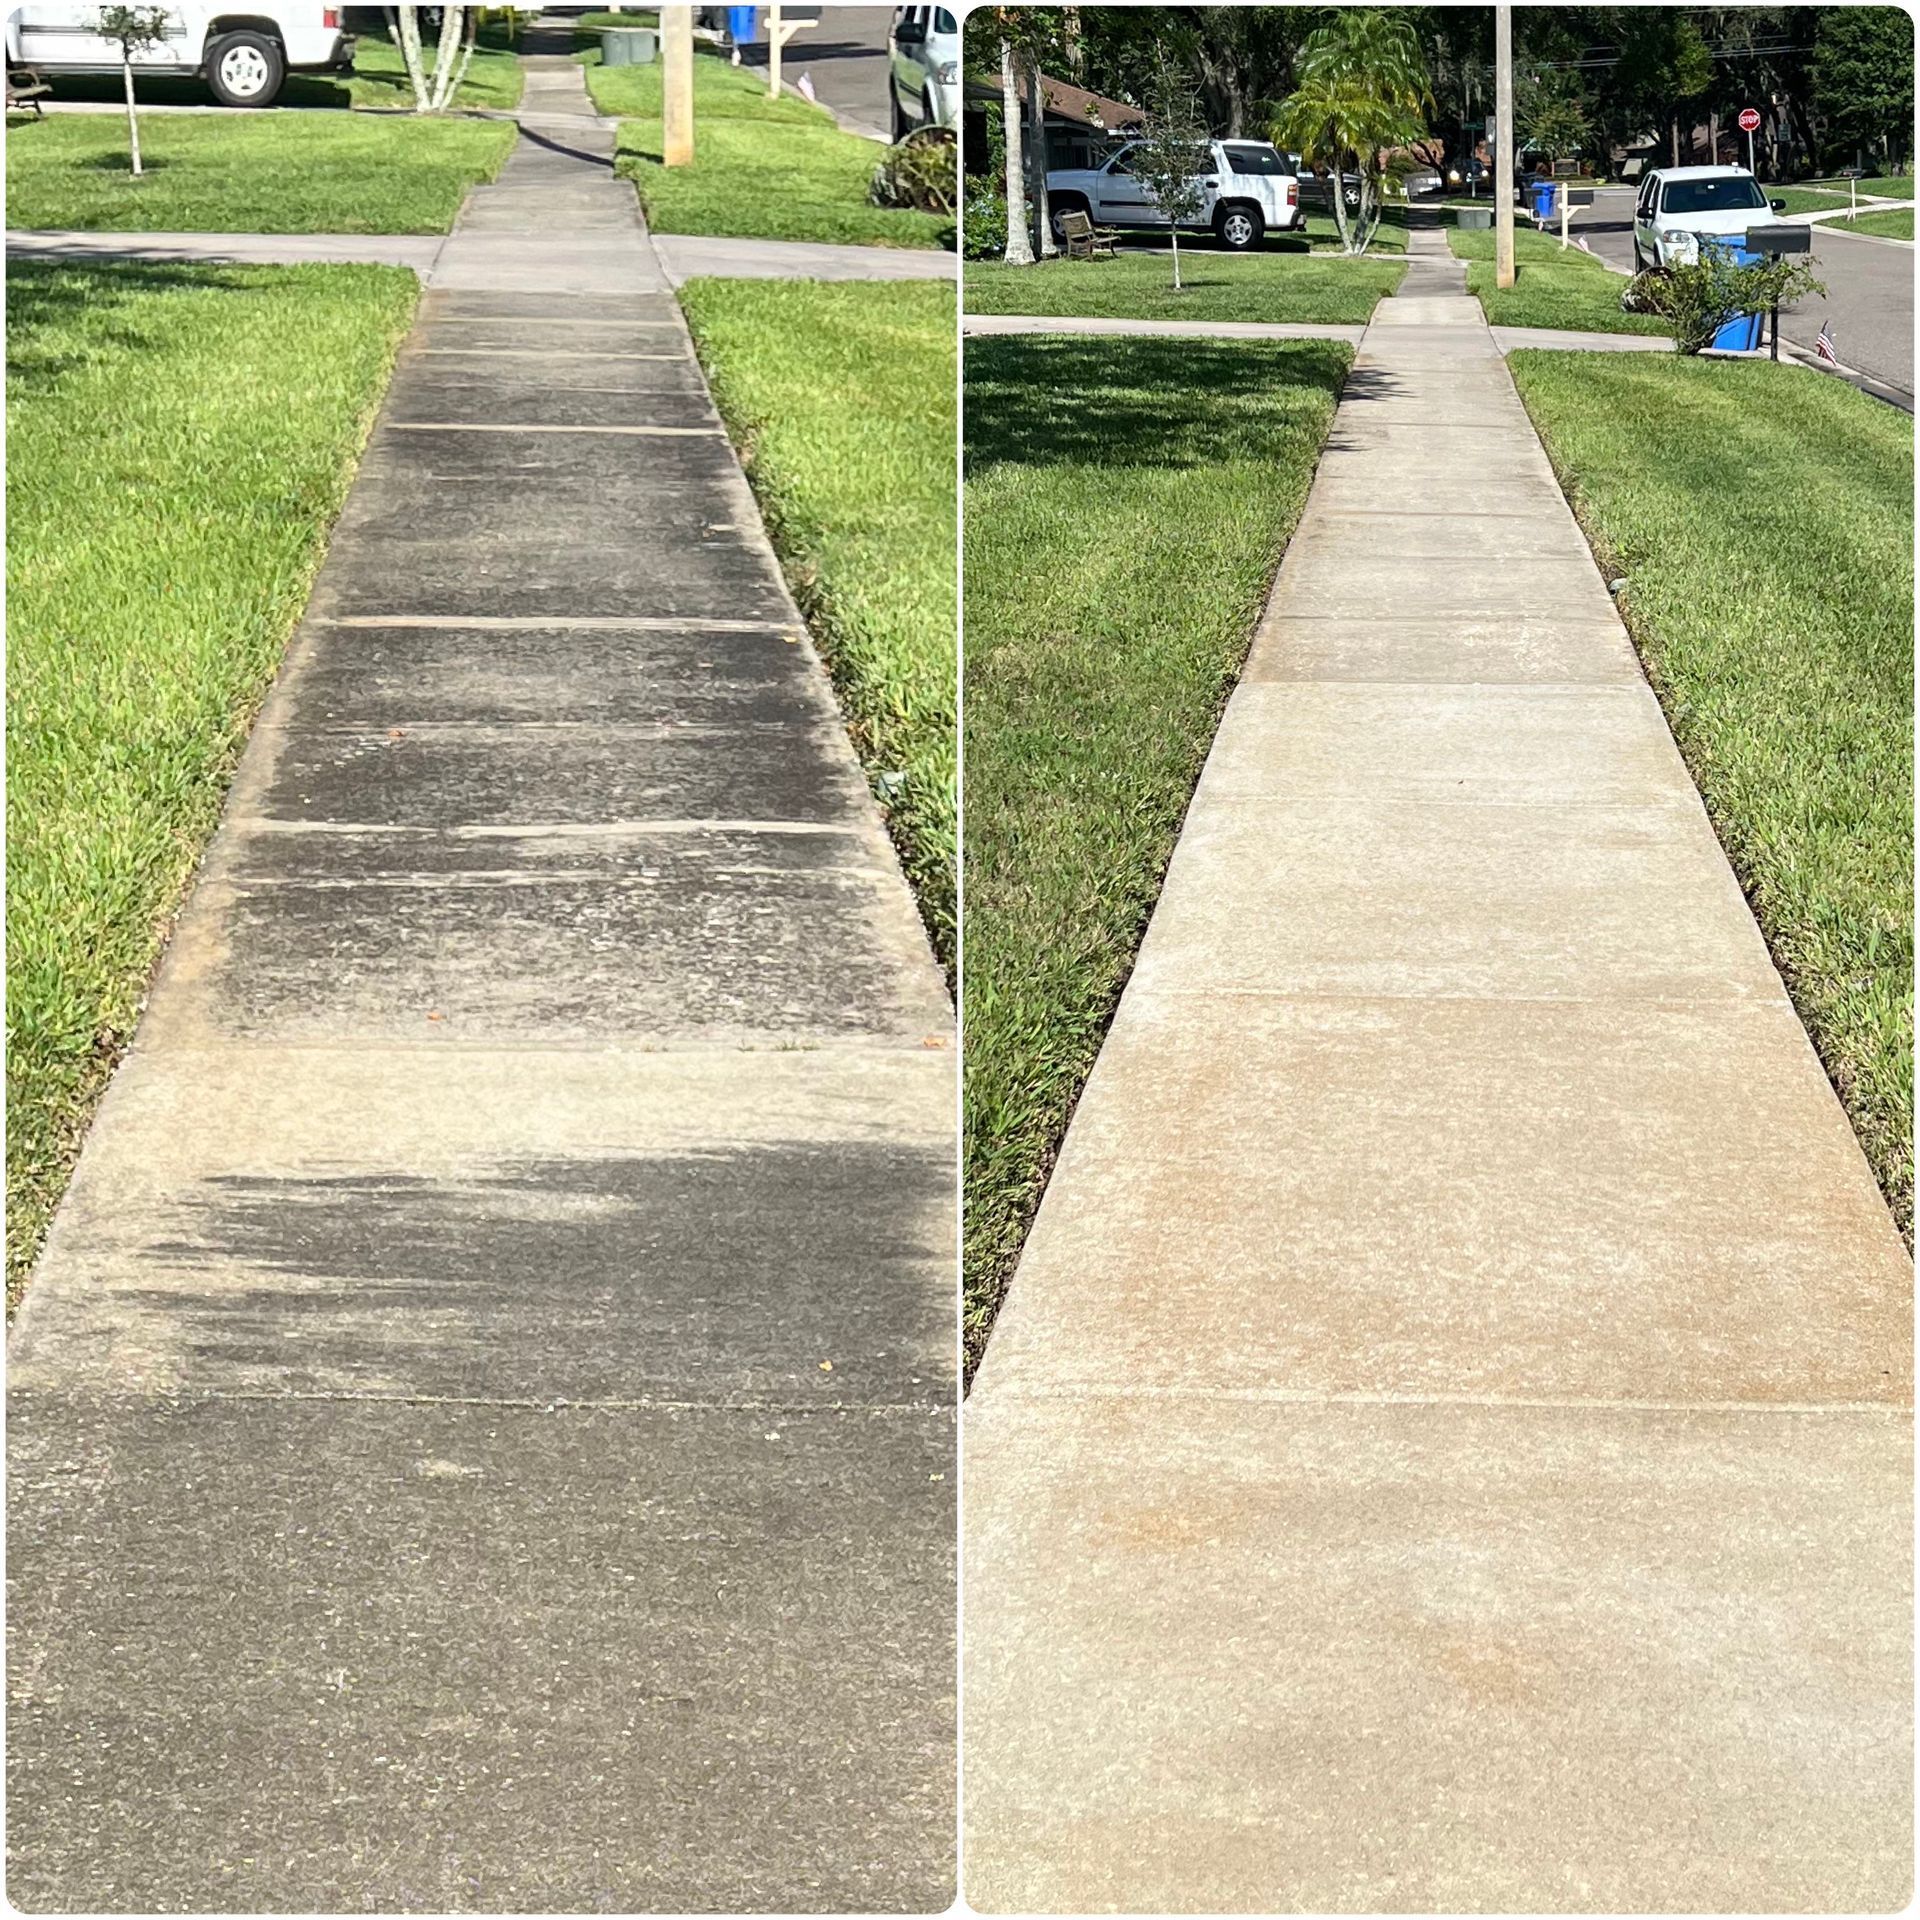 A before and after photo of a sidewalk that has been cleaned.